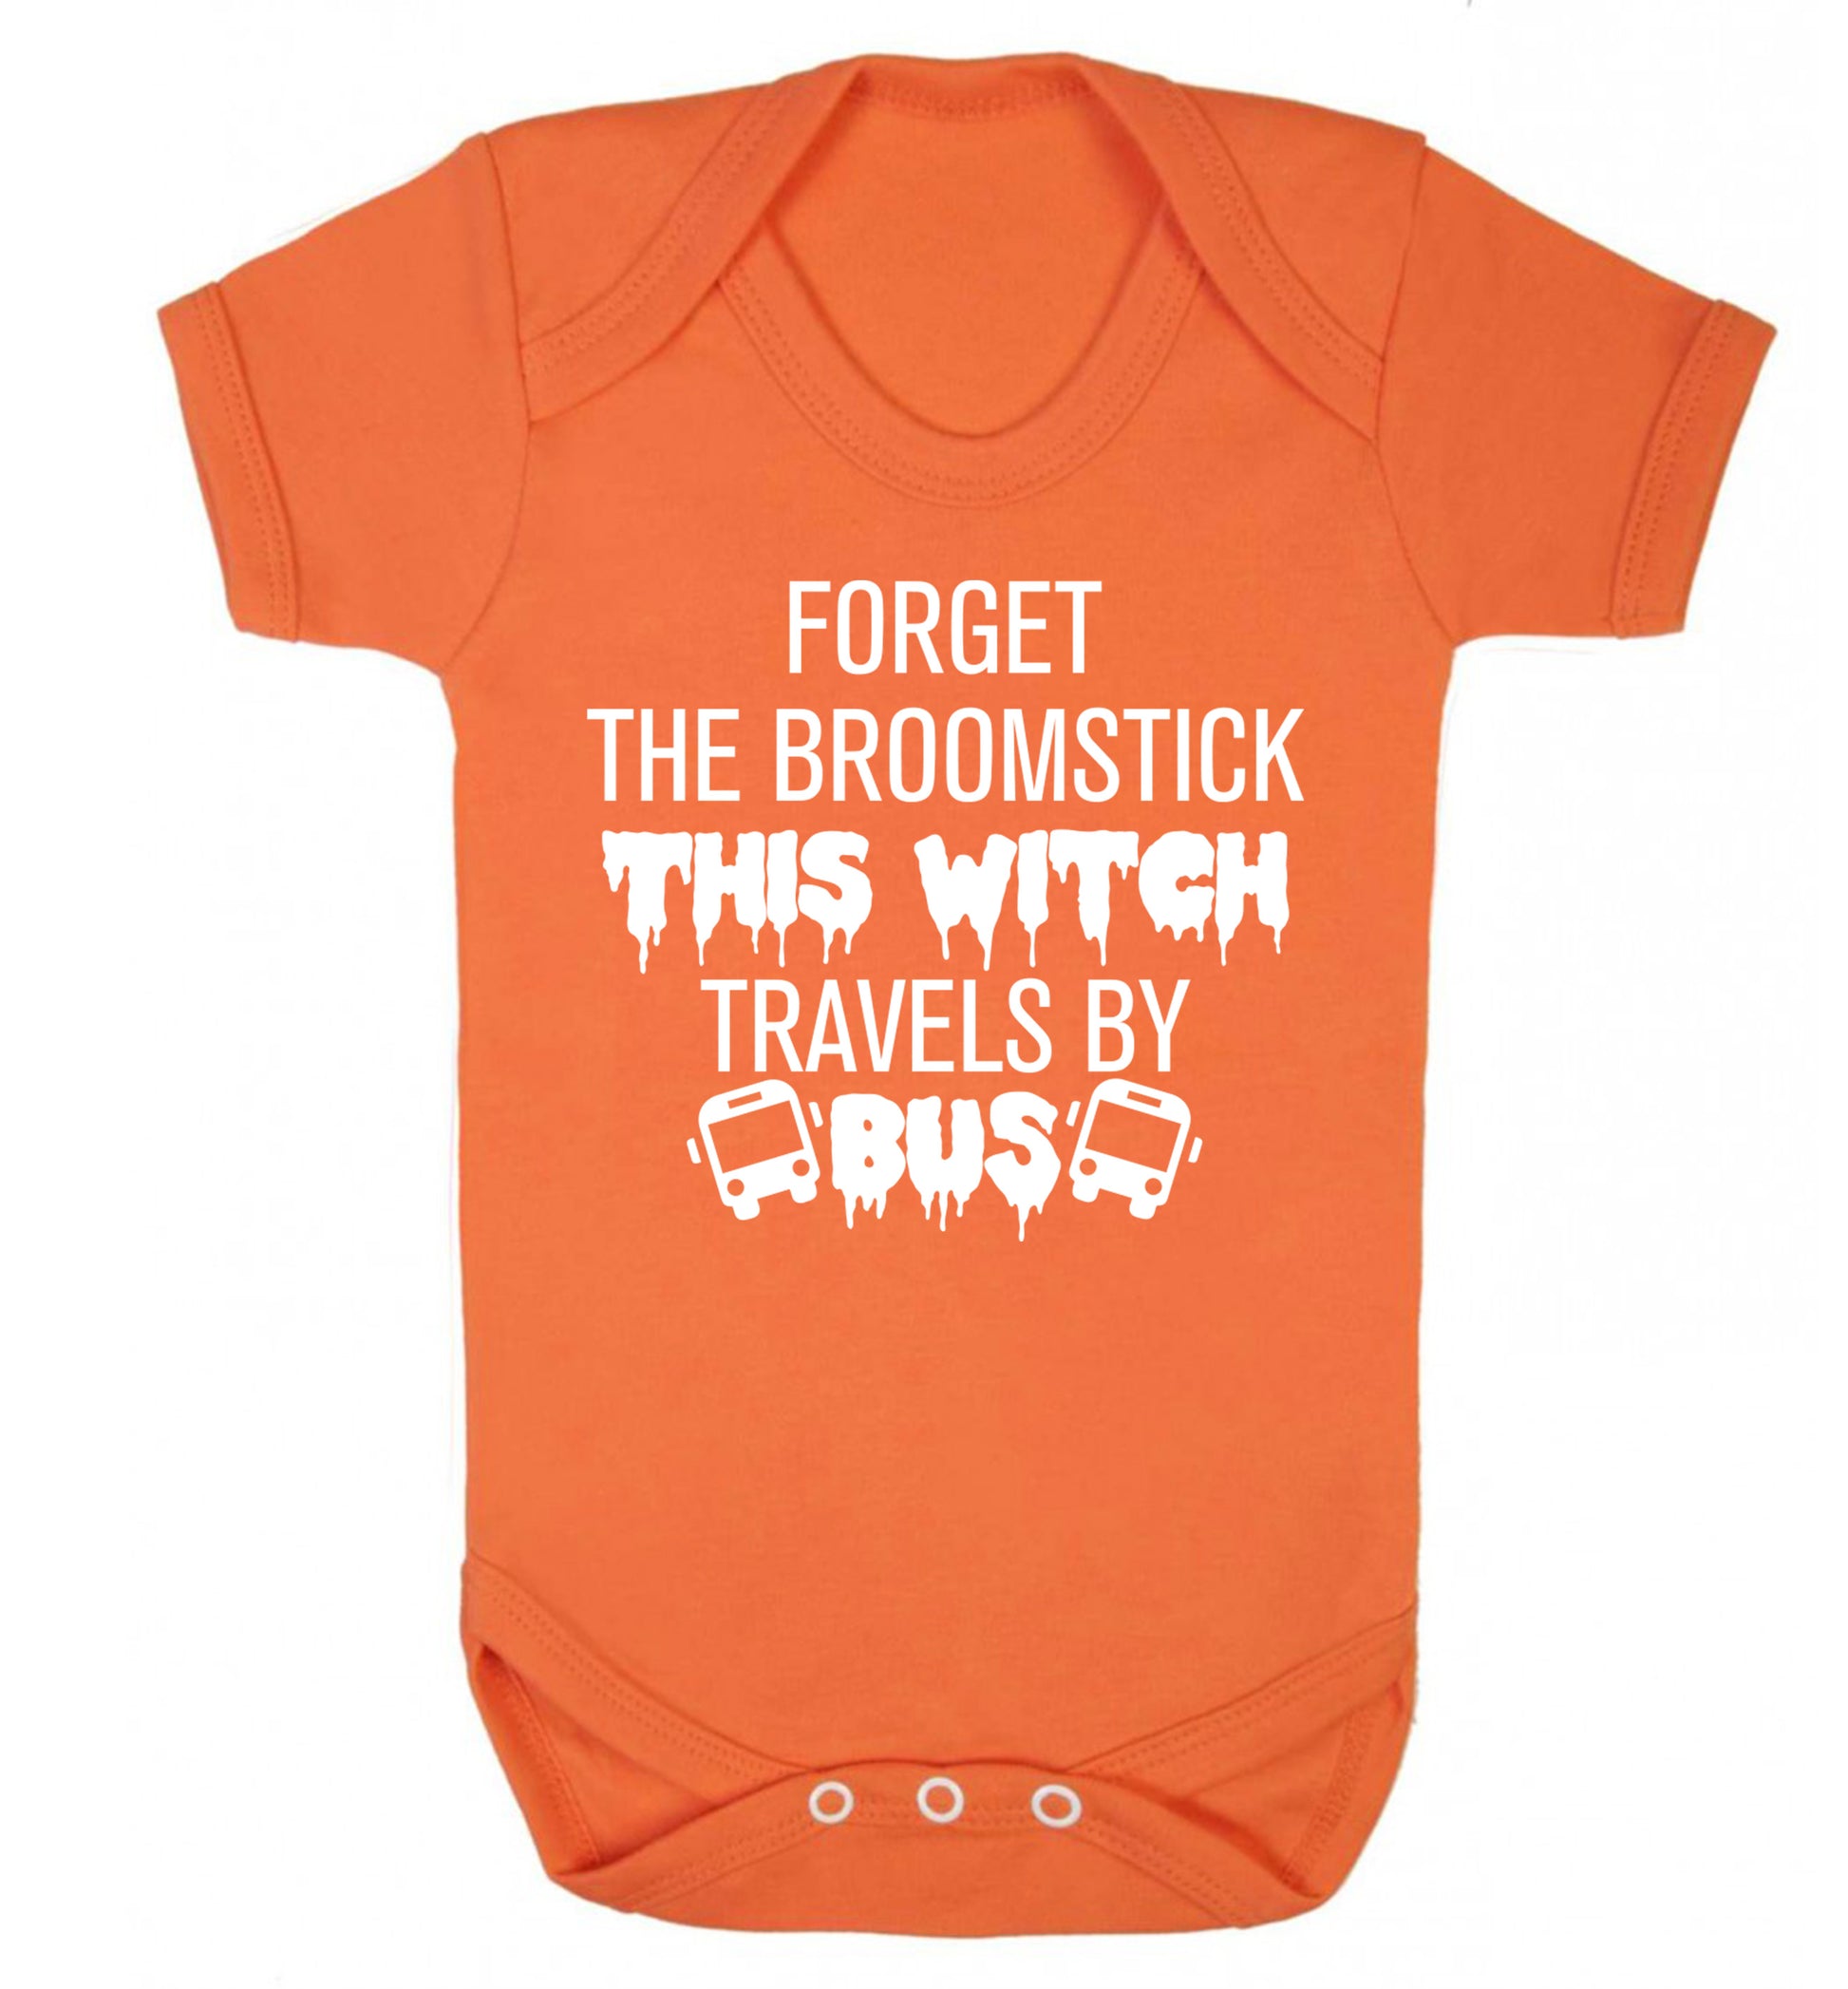 Forget the broomstick this witch travels by bus Baby Vest orange 18-24 months